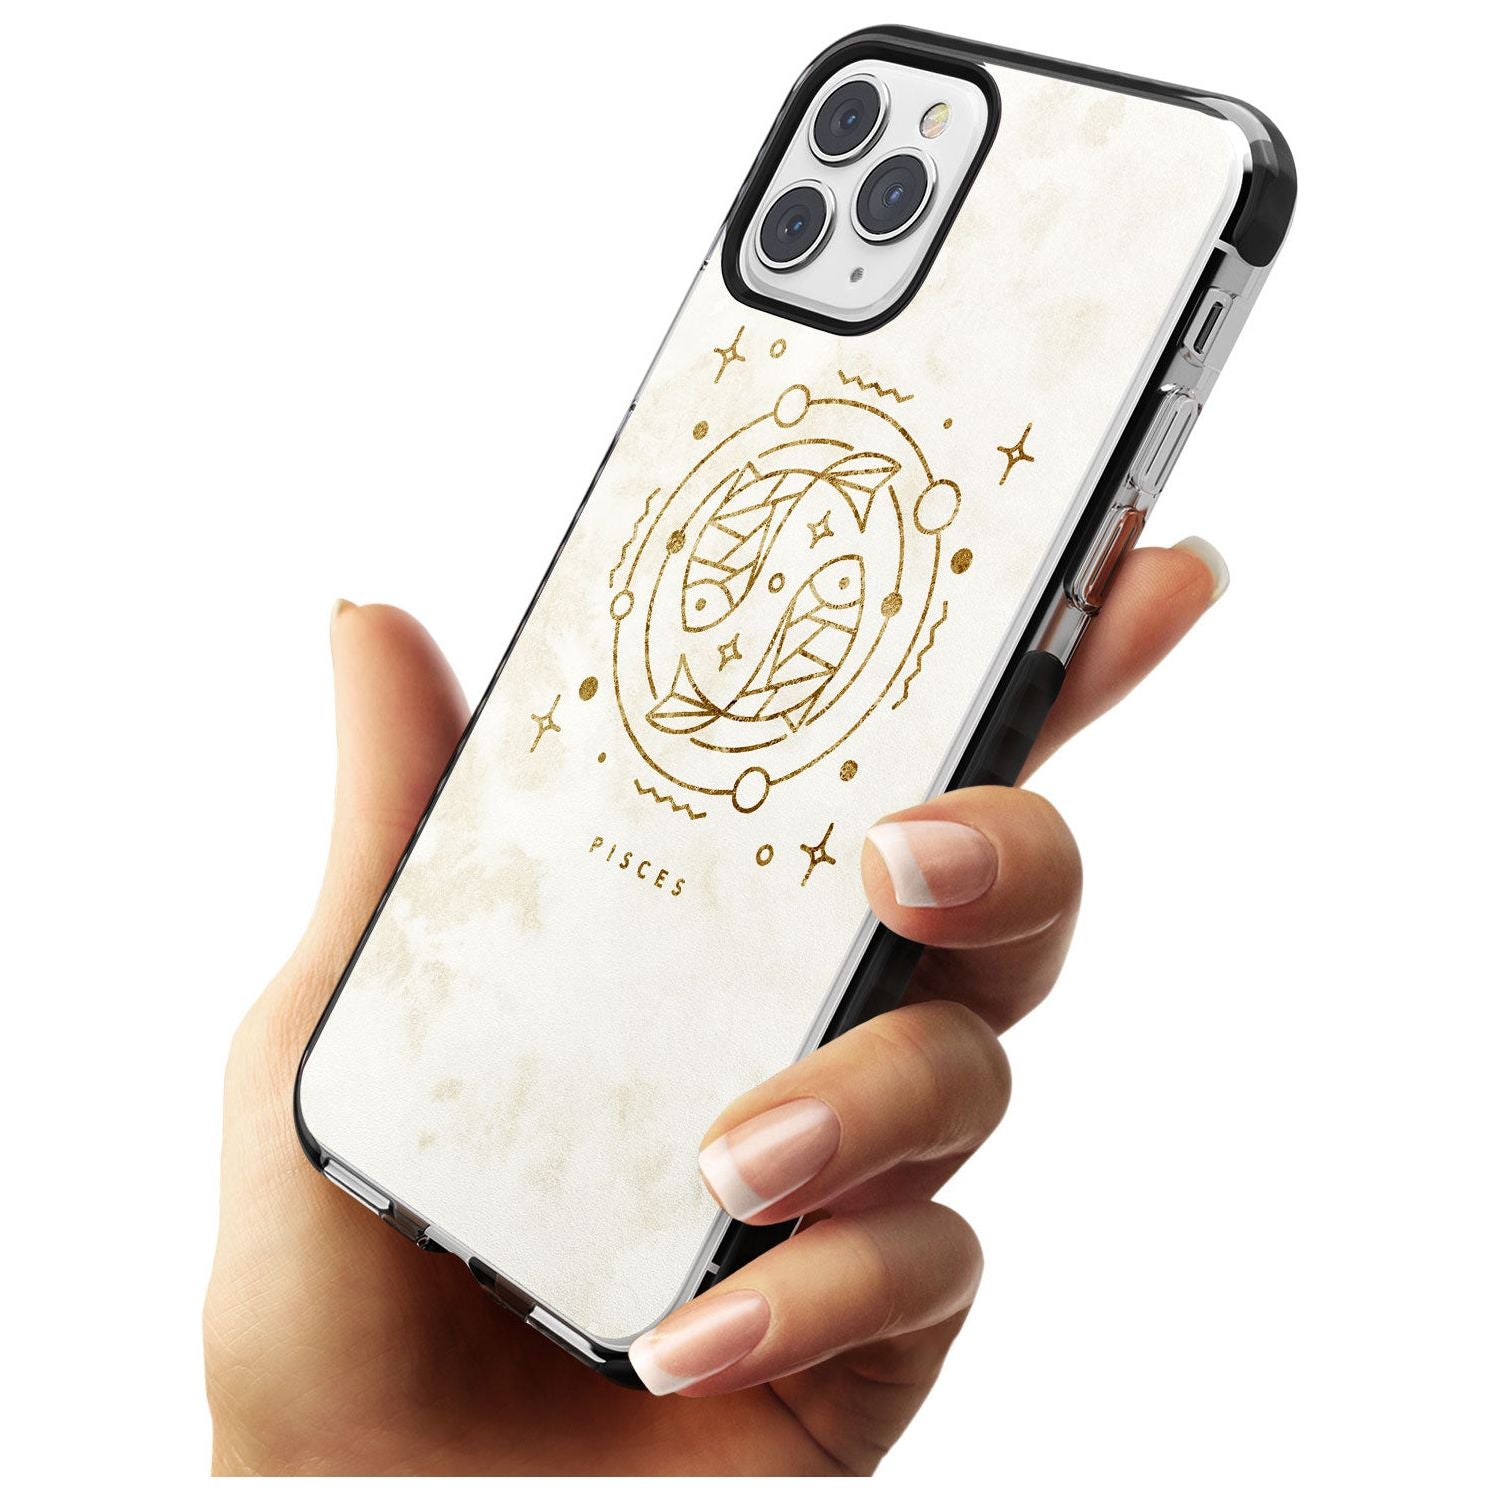 Pisces Emblem - Solid Gold Marbled Design Black Impact Phone Case for iPhone 11 Pro Max